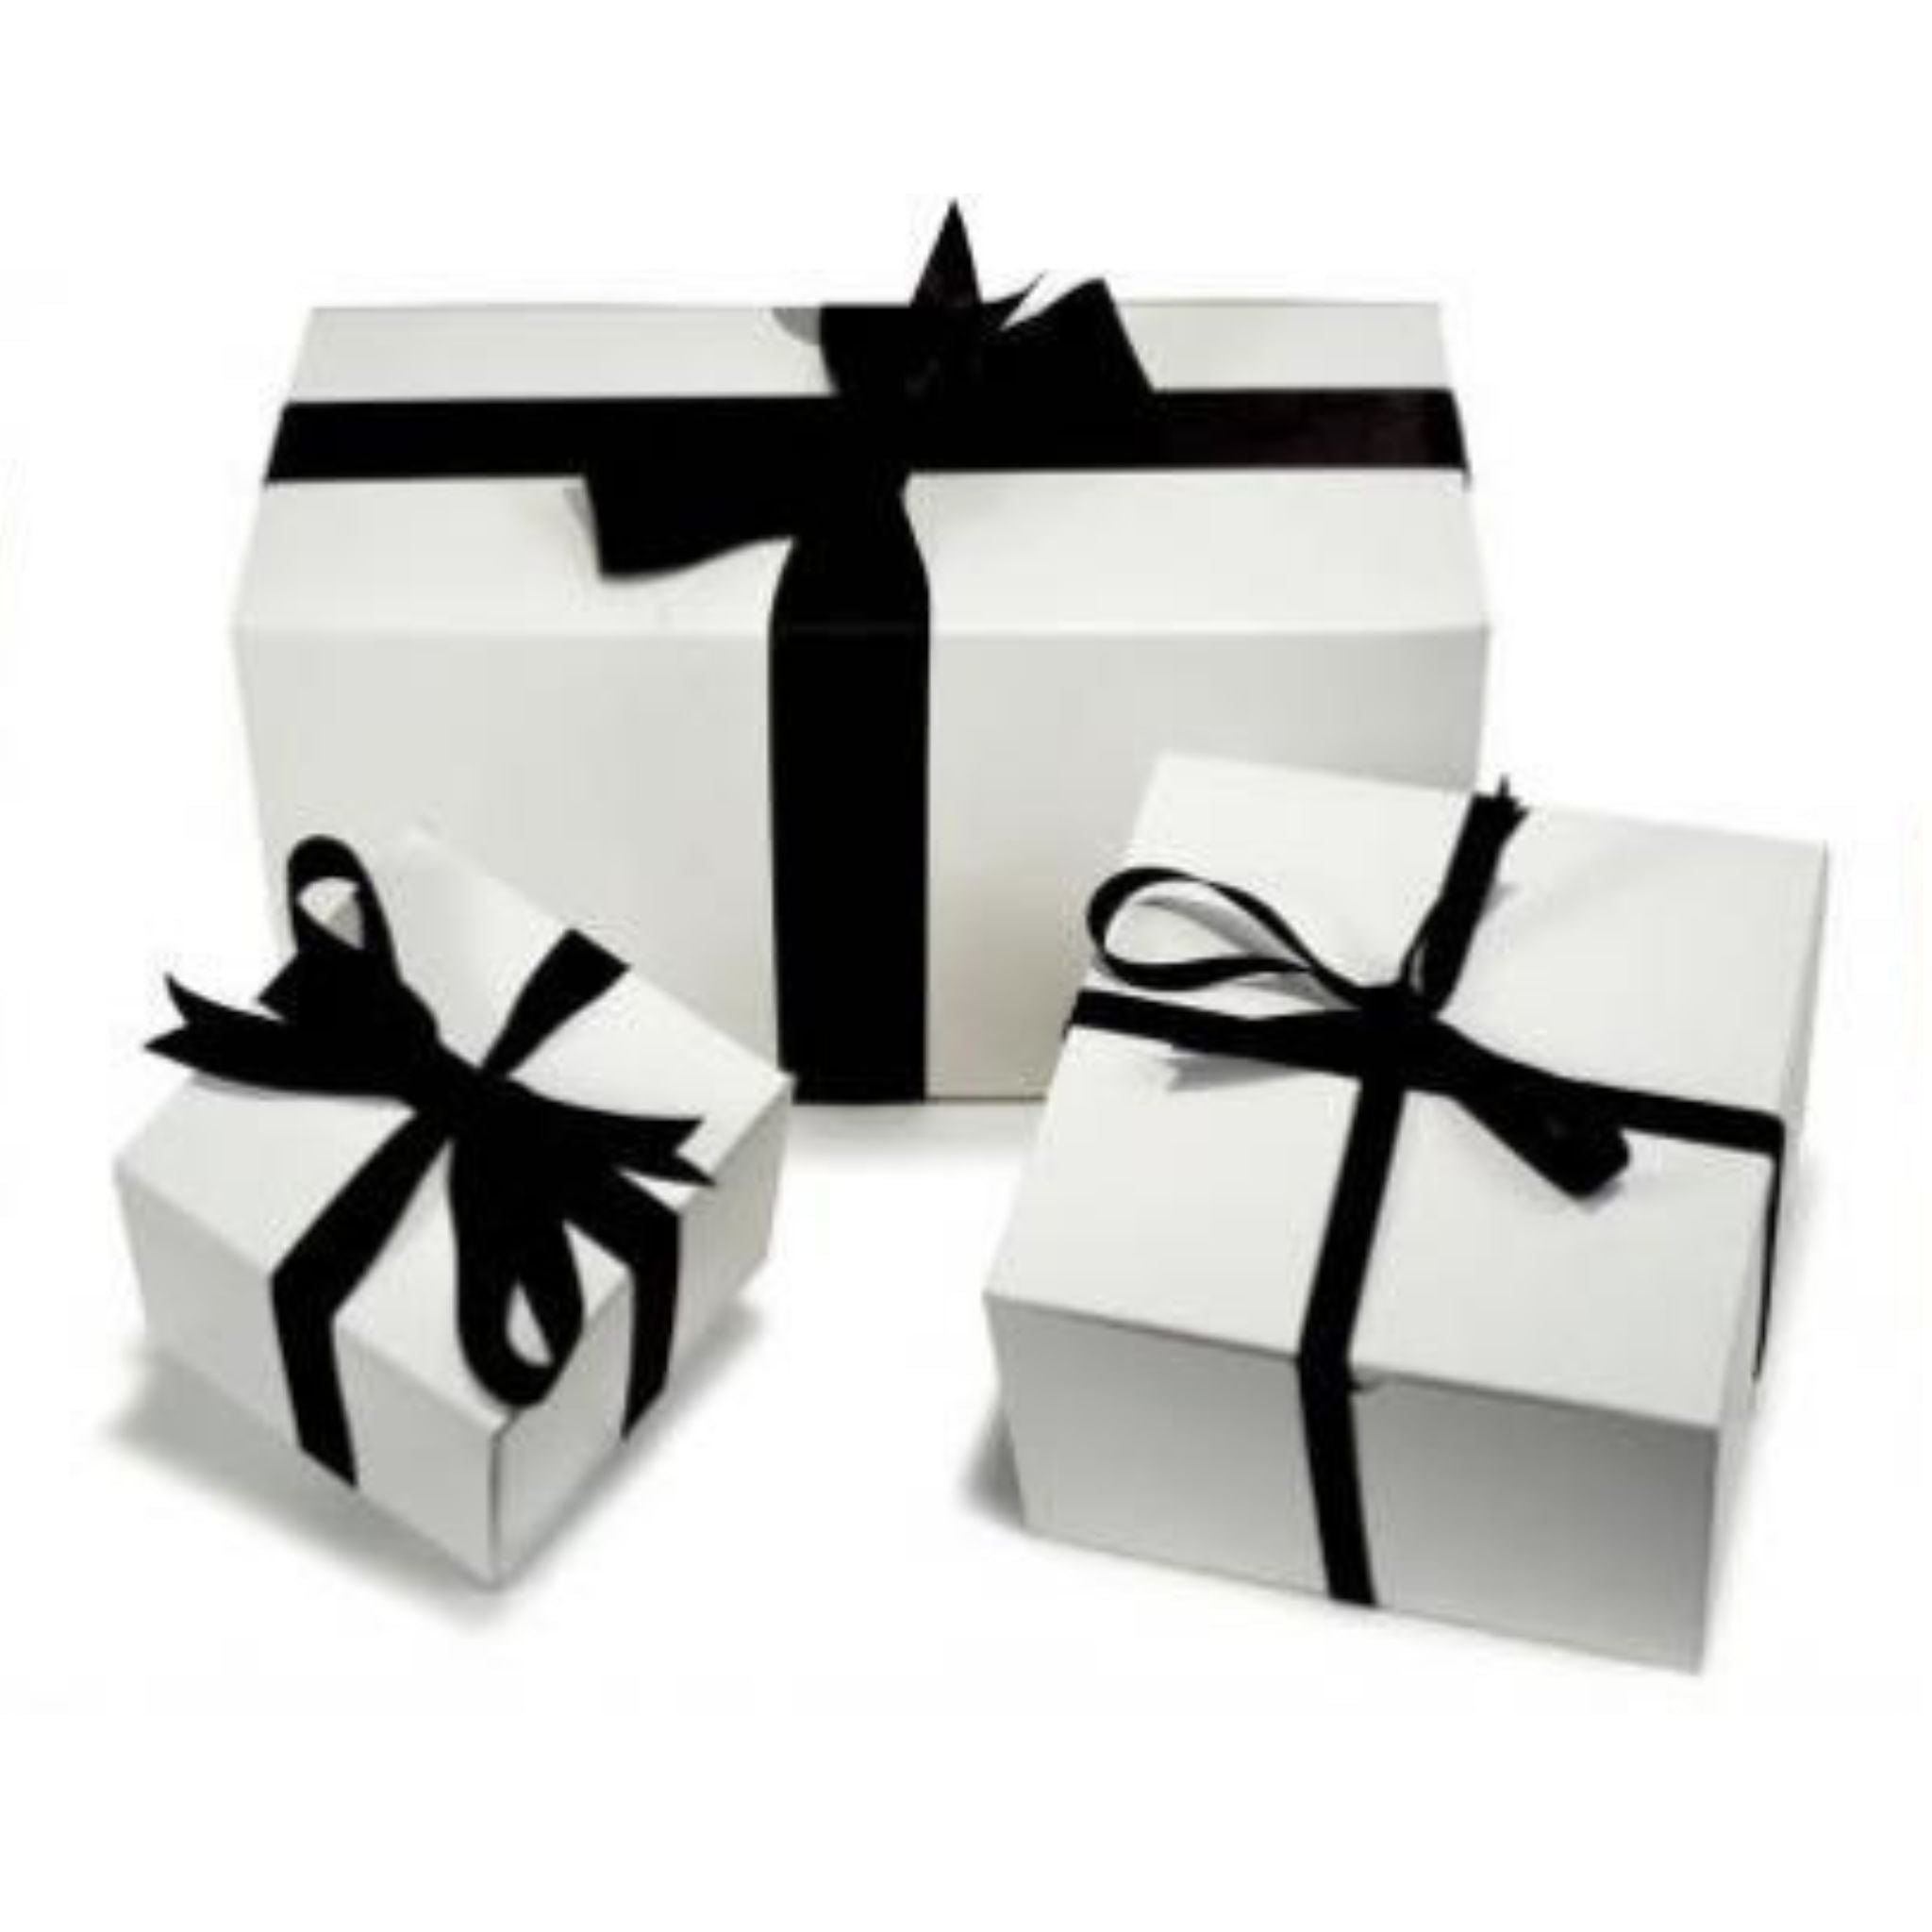 Gift Wrapping